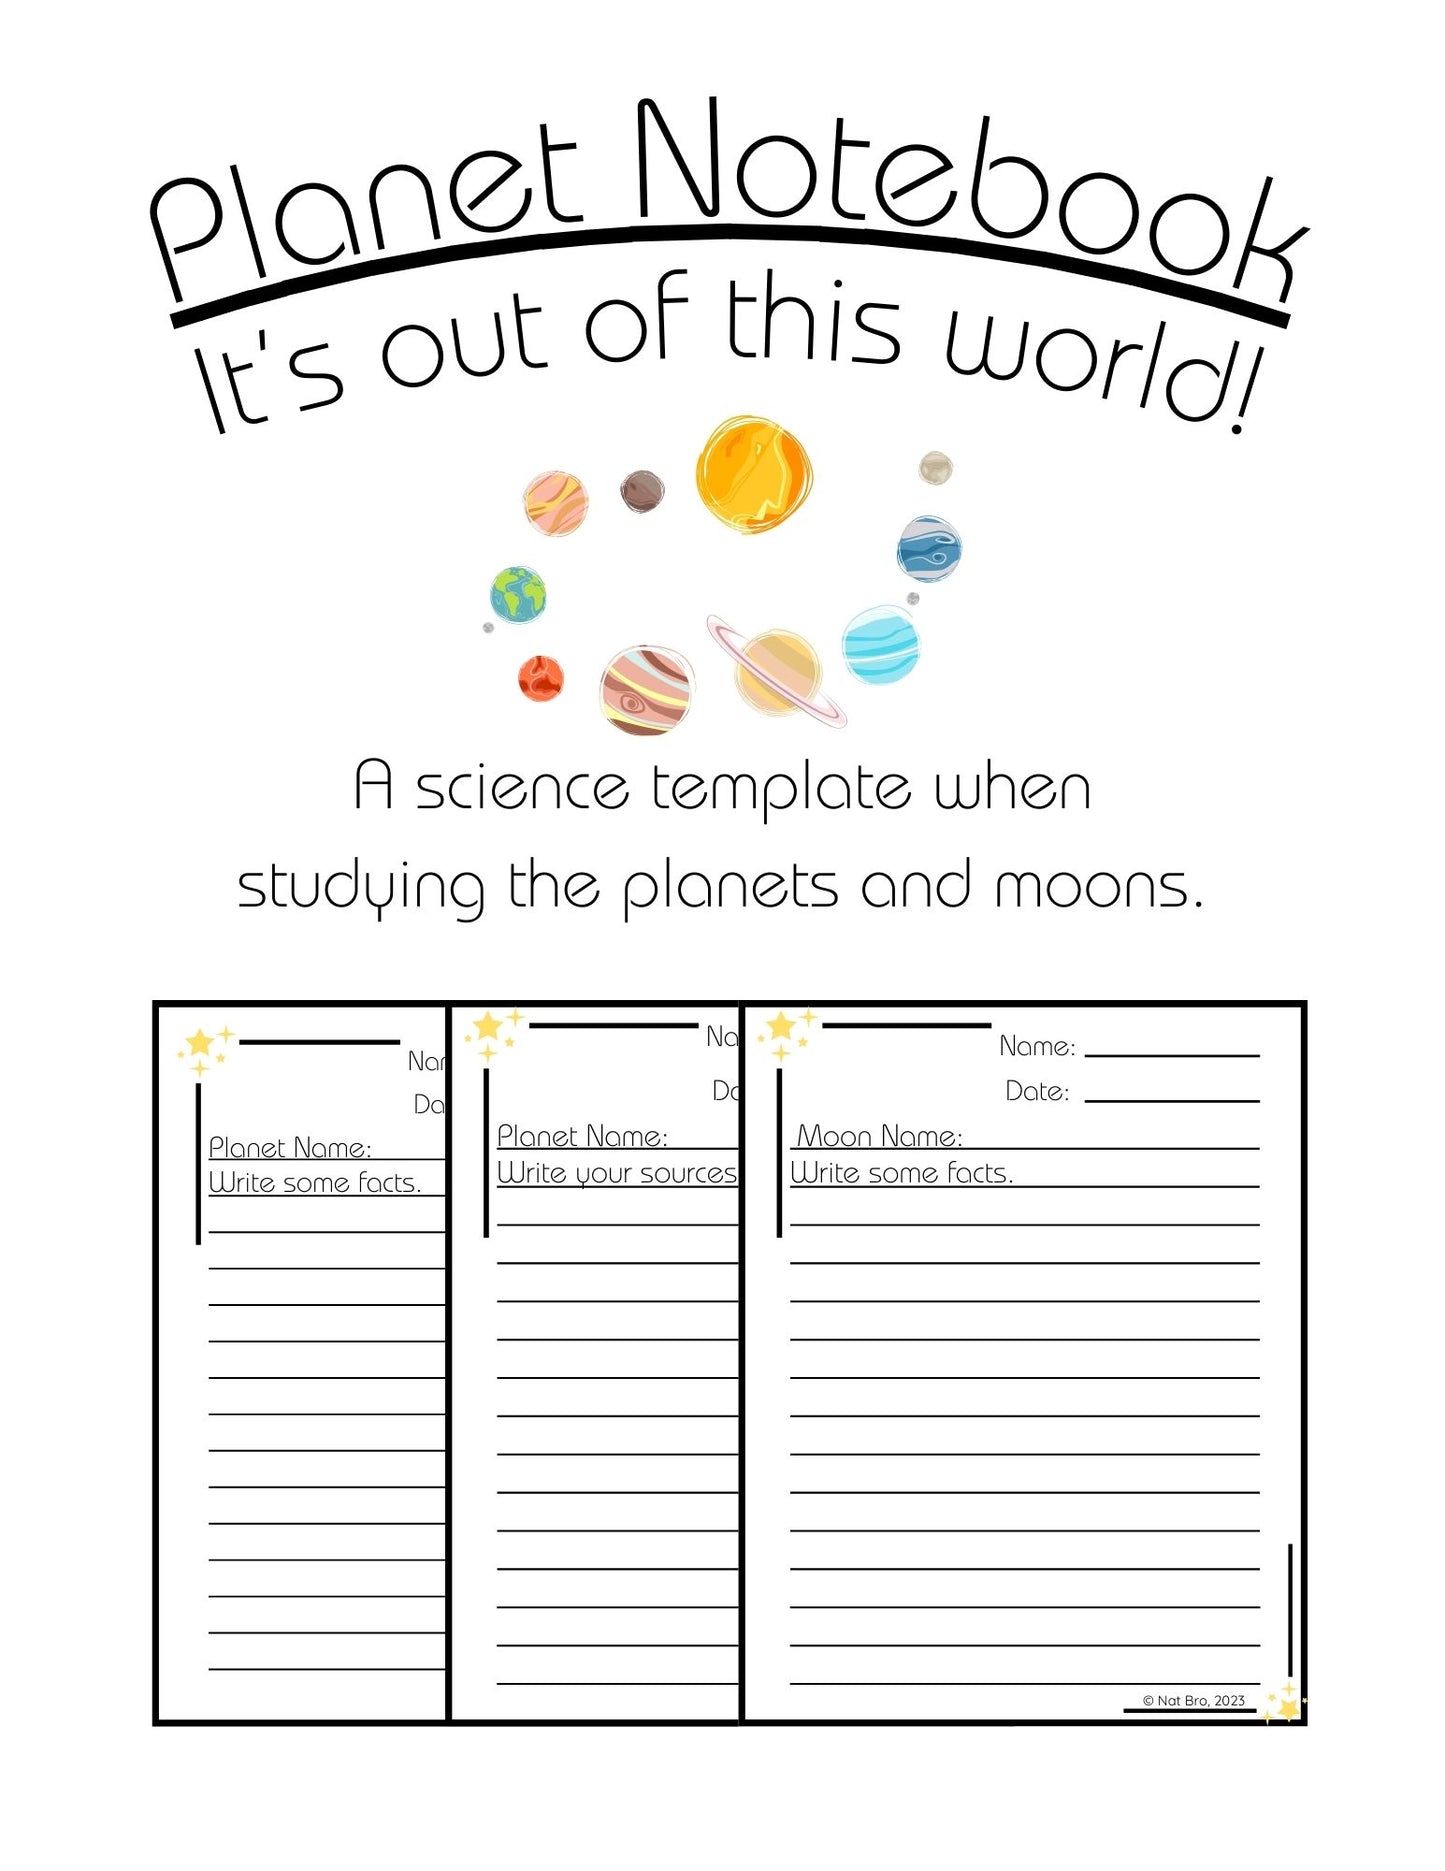 Generic Science Planet and Moon Template Notebook